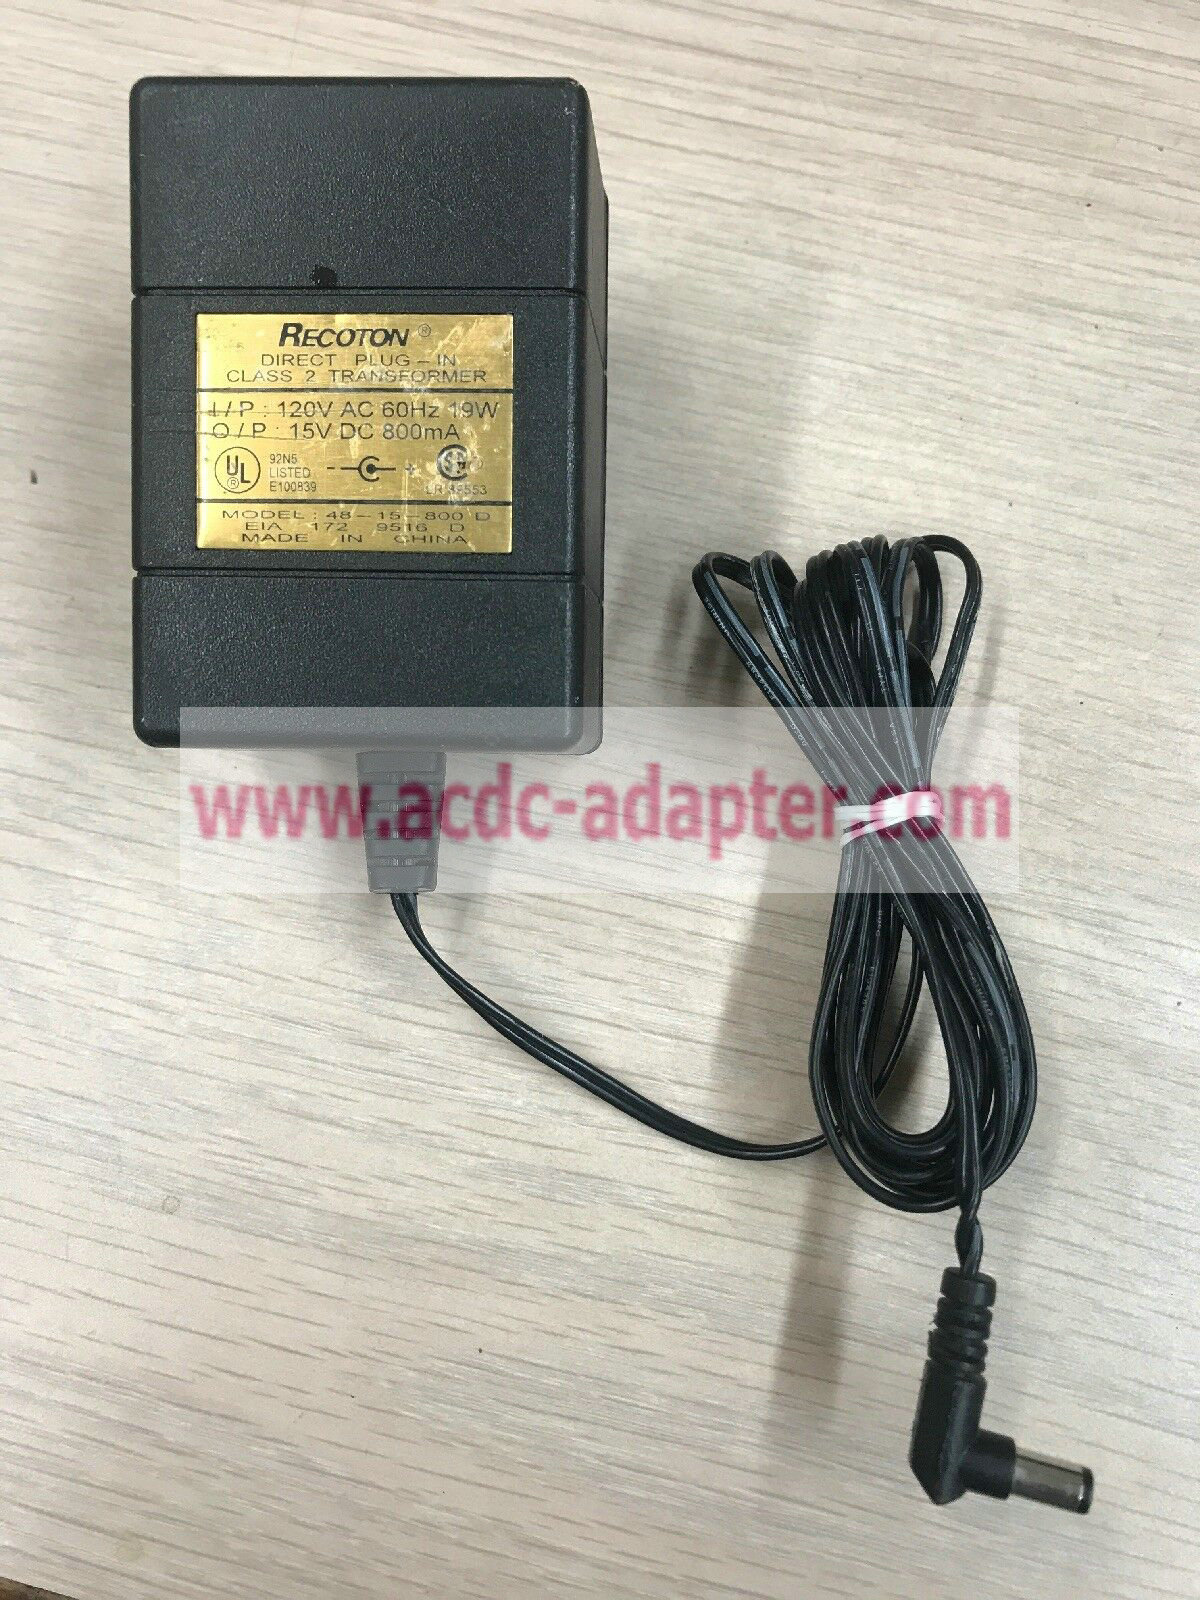 New 15V DC 800mA Recoton 48-15-800D Adapter Power Supply For Wireless Speakers